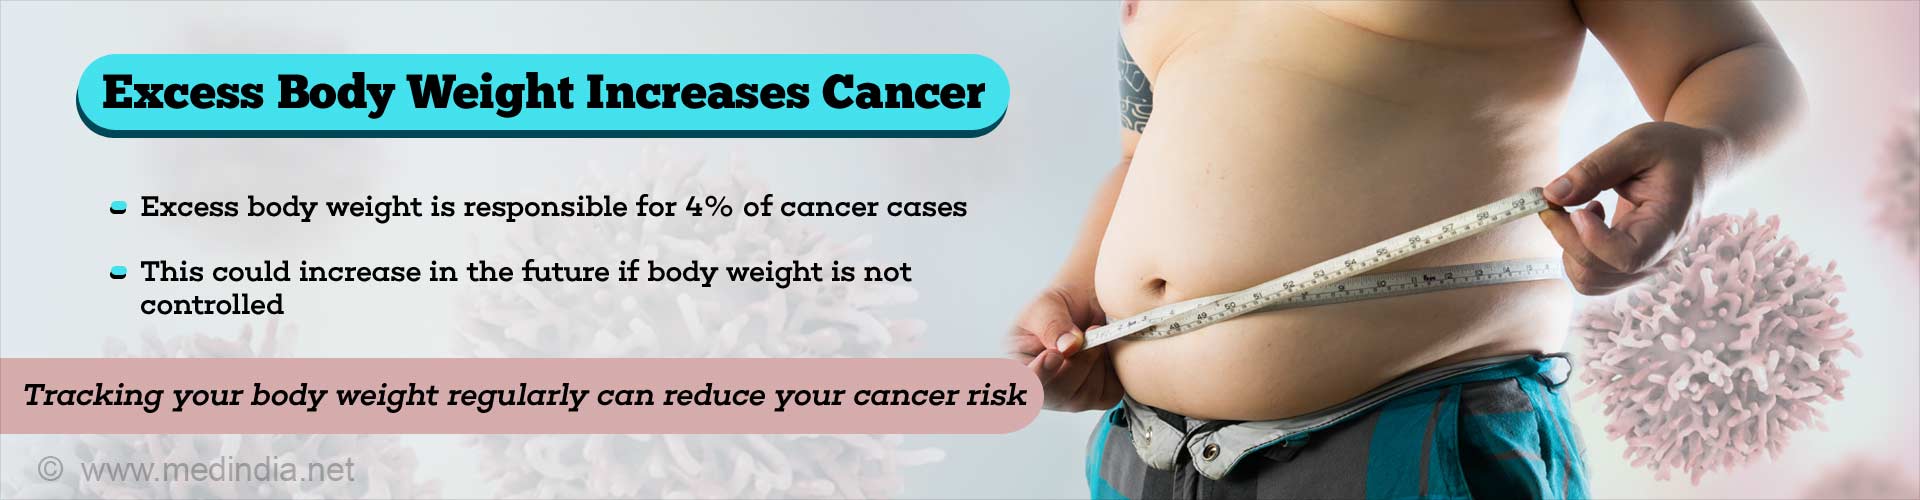 Excess body weight increases cancer. Excess body weight is responsible for 4% of cancer cases. This could increase in the future if body weight is not controlled. Tracking your body weight regularly can reduce your cancer risk.